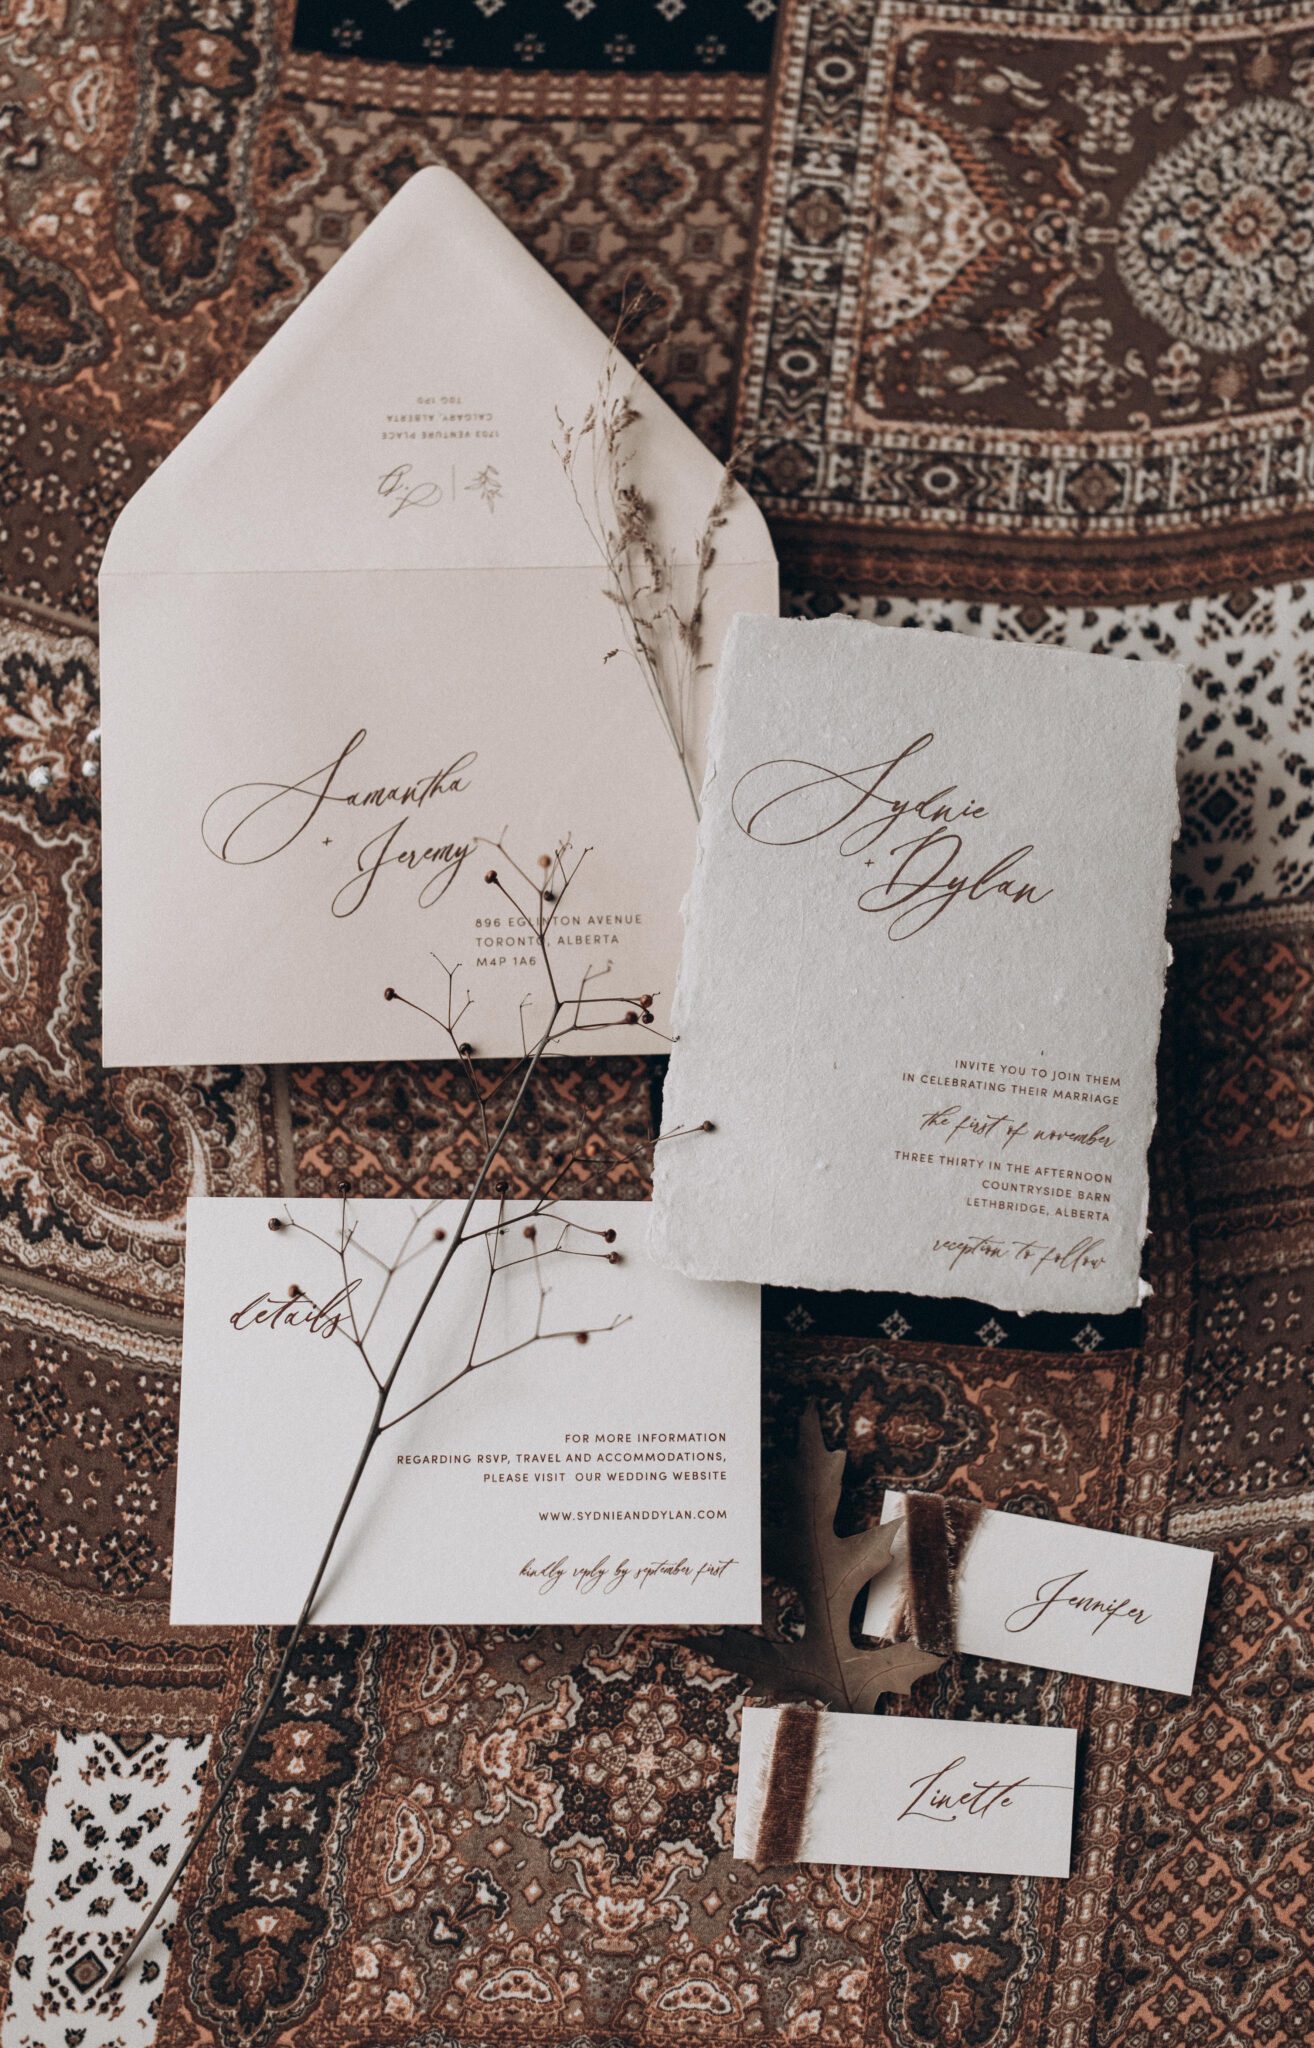 Neutral romantic wedding invitation suite with handmade paper and brown velvet ribbon. Designed by Pink Umbrella Invitations. Vintage decor meets country chic style in this Alberta wedding inspiration